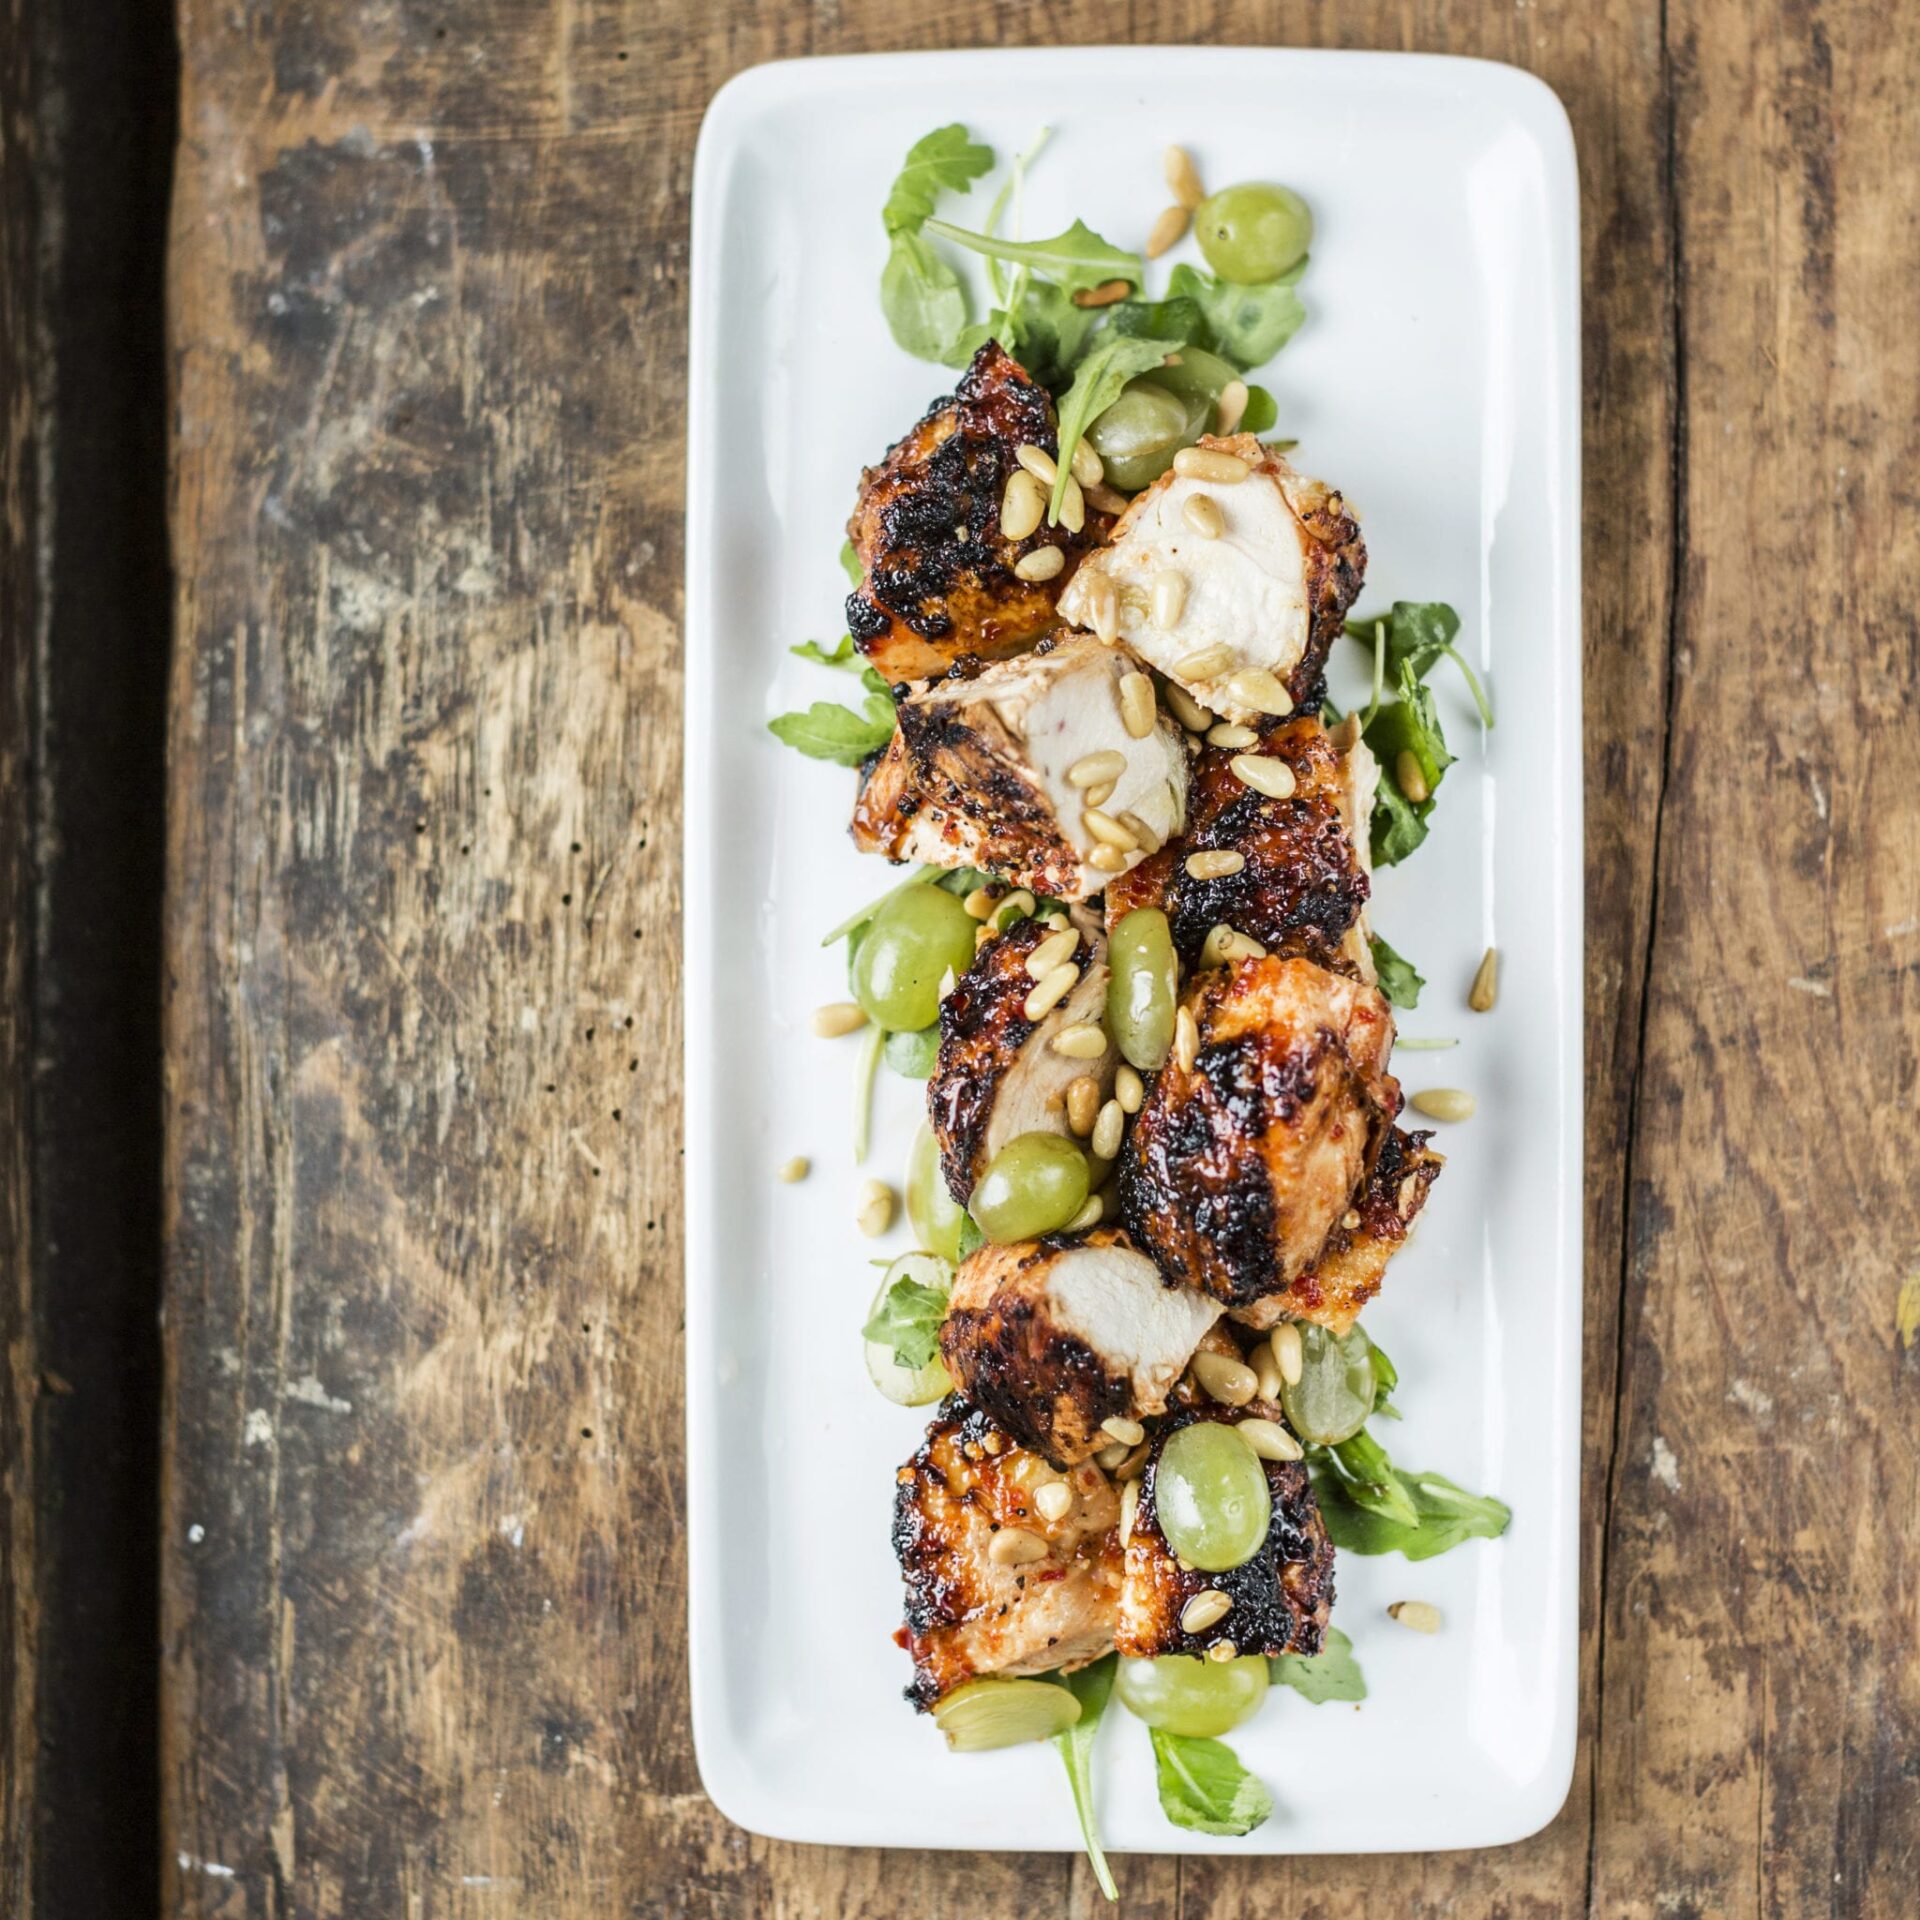 Grilled Chicken with Chili Agrodolce